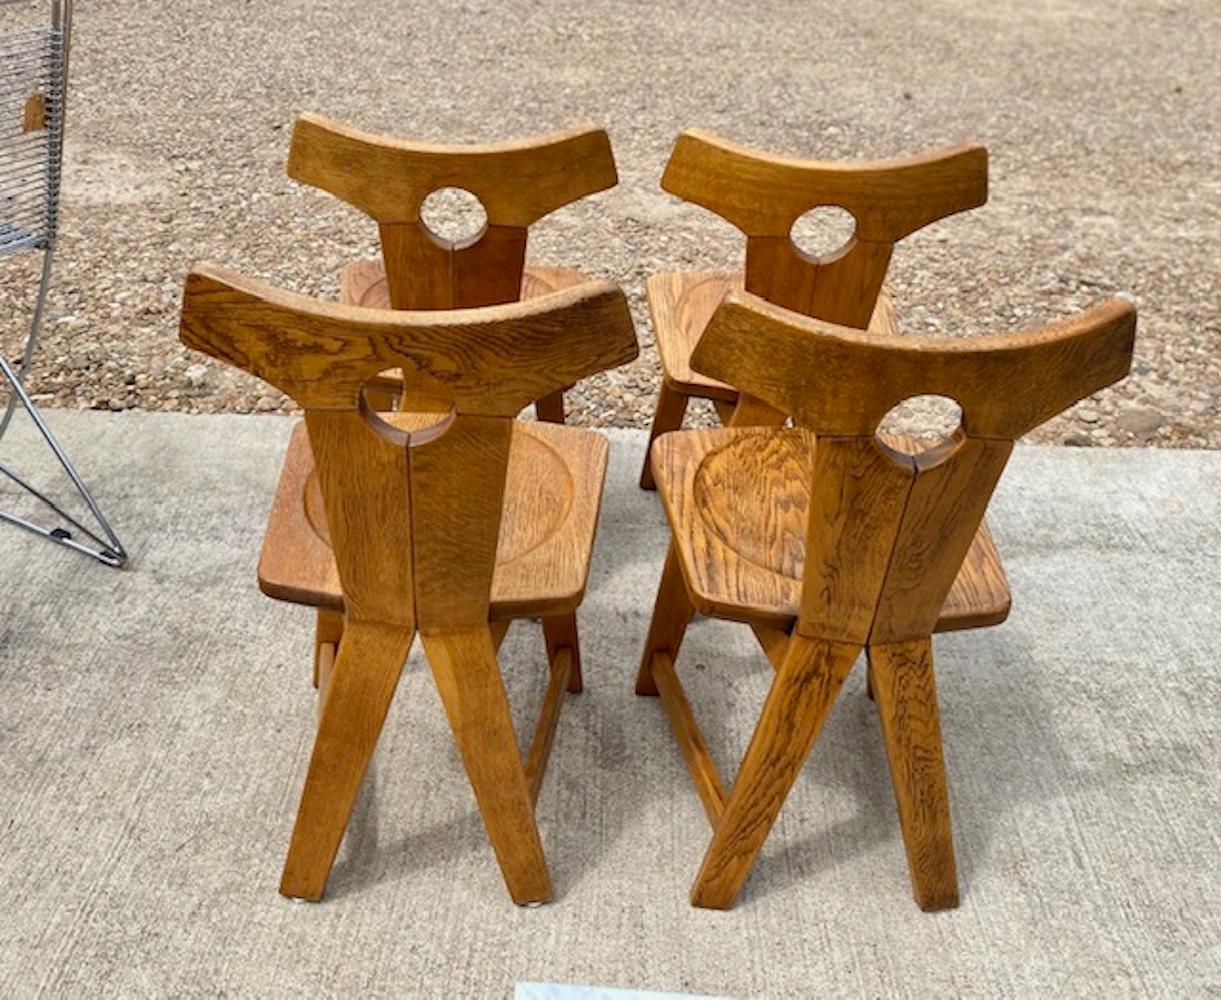 Set of 4 brutalist solid oak chairs, Belgium, circa 1960s features unique curved back, seats have a beveled indention, sturdy and in good overall condition with light age-appropriate wear. 
Dimensions: 18